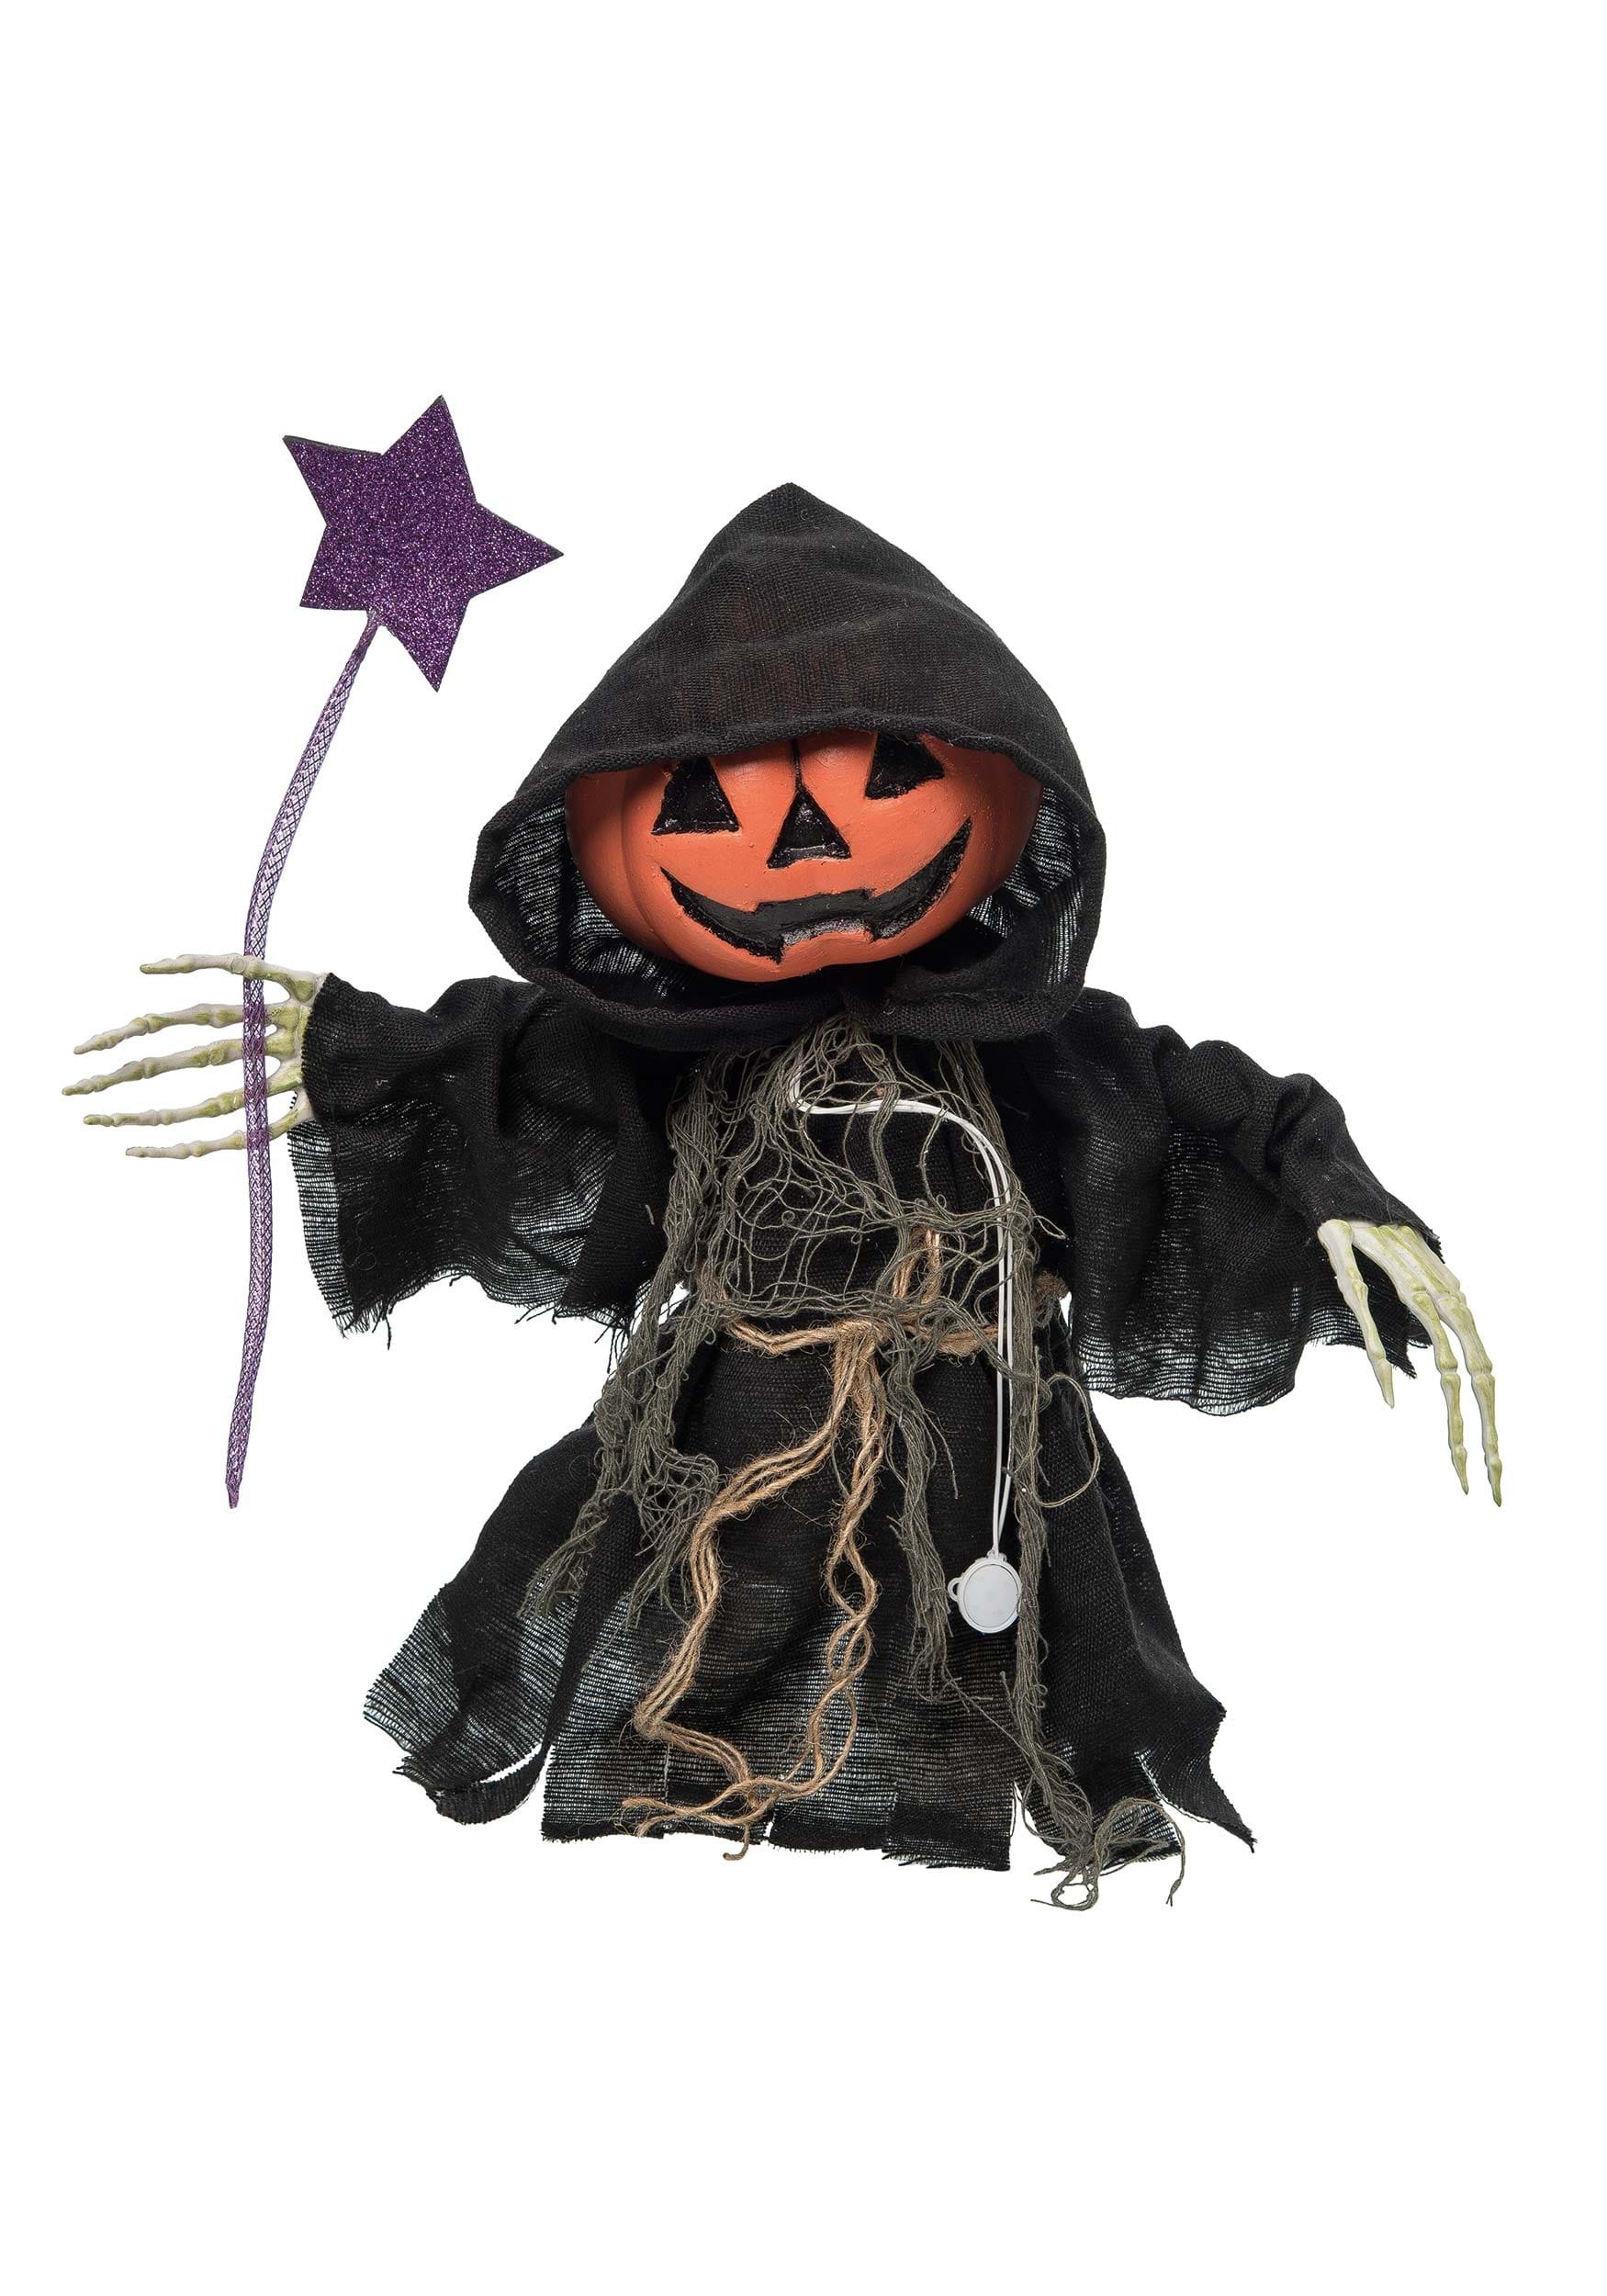 16 Inch Light Up Dancing Jack-O-Lantern With Sound